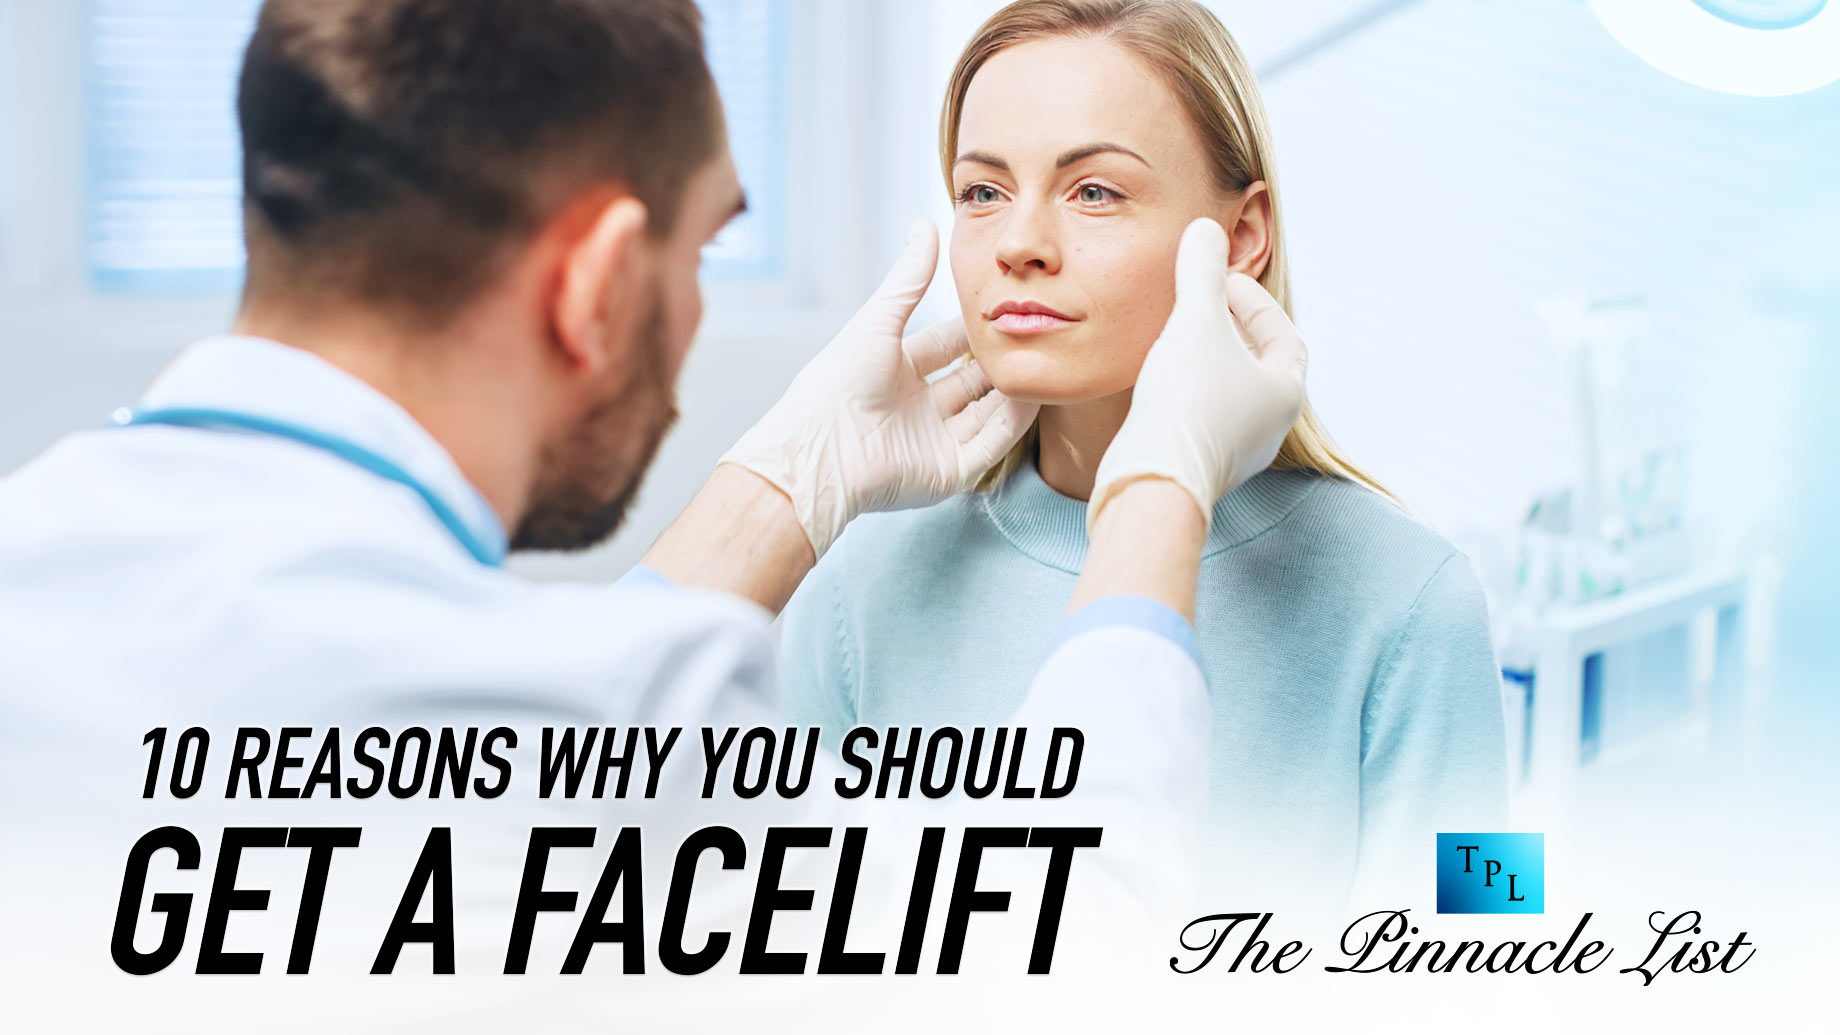 10 Reasons Why You Should Get A Facelift